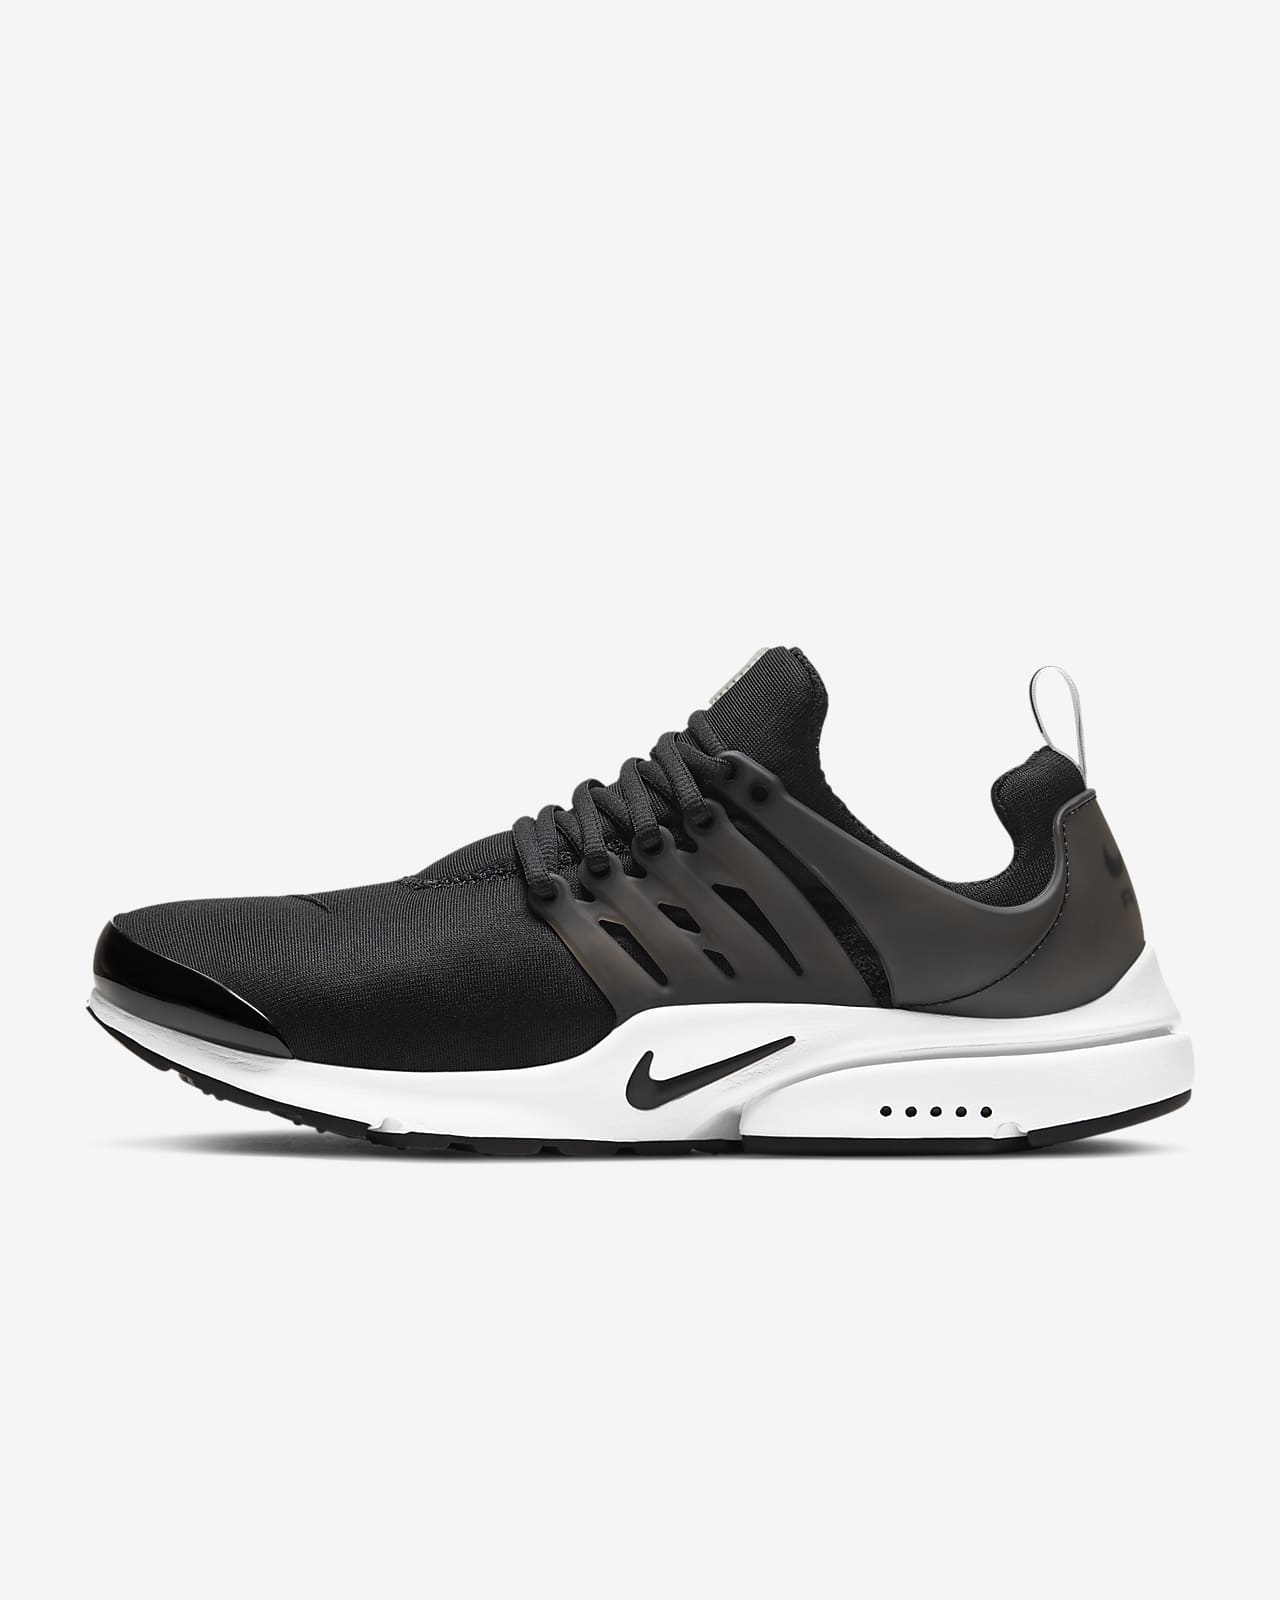 who are the main people wearing nike presto shoes